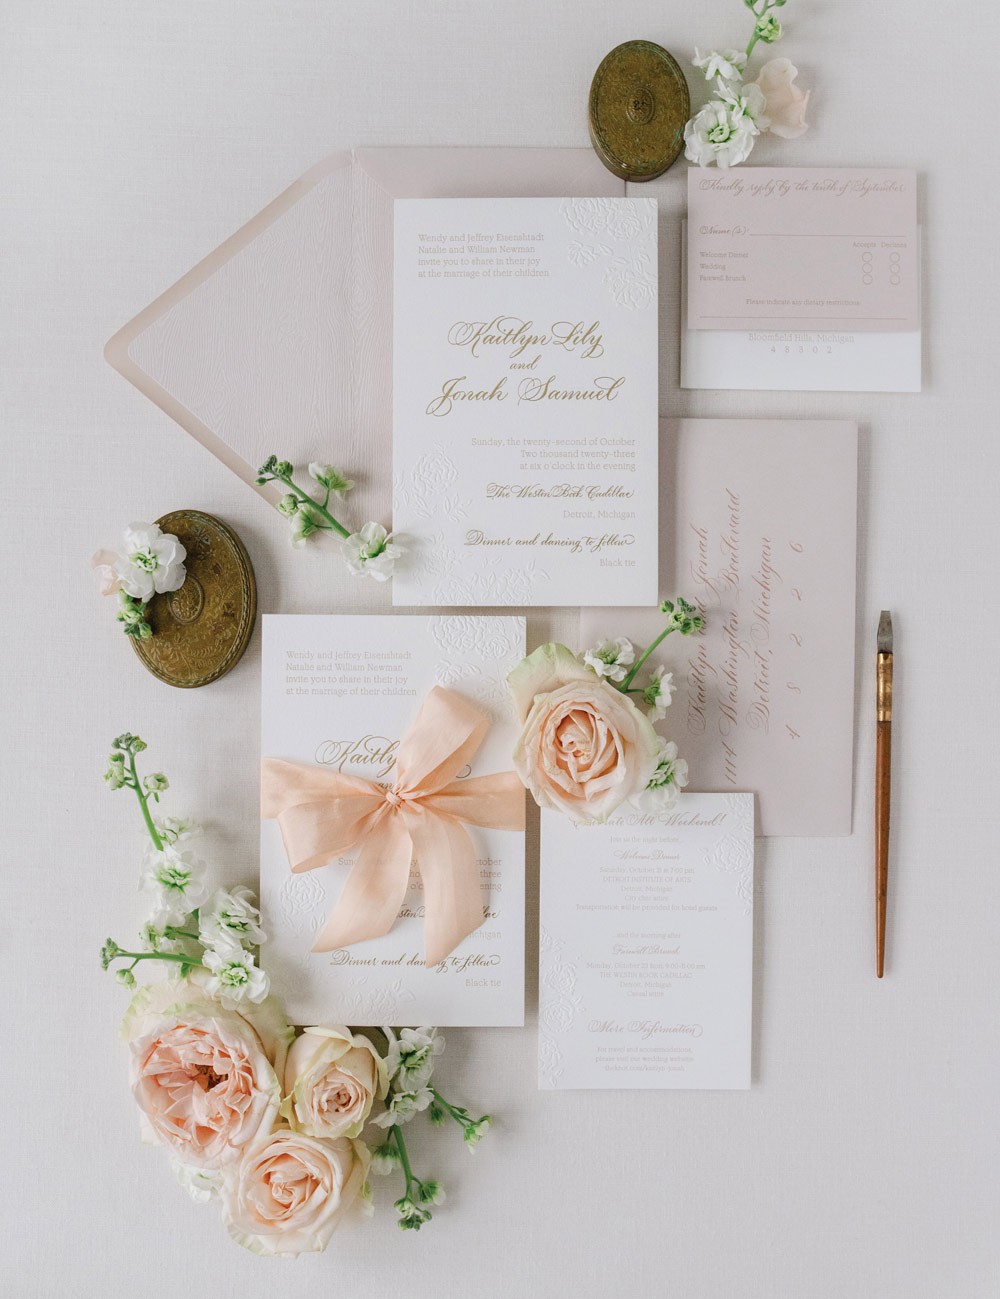 wedding invitations from Leah E. Moss Designs